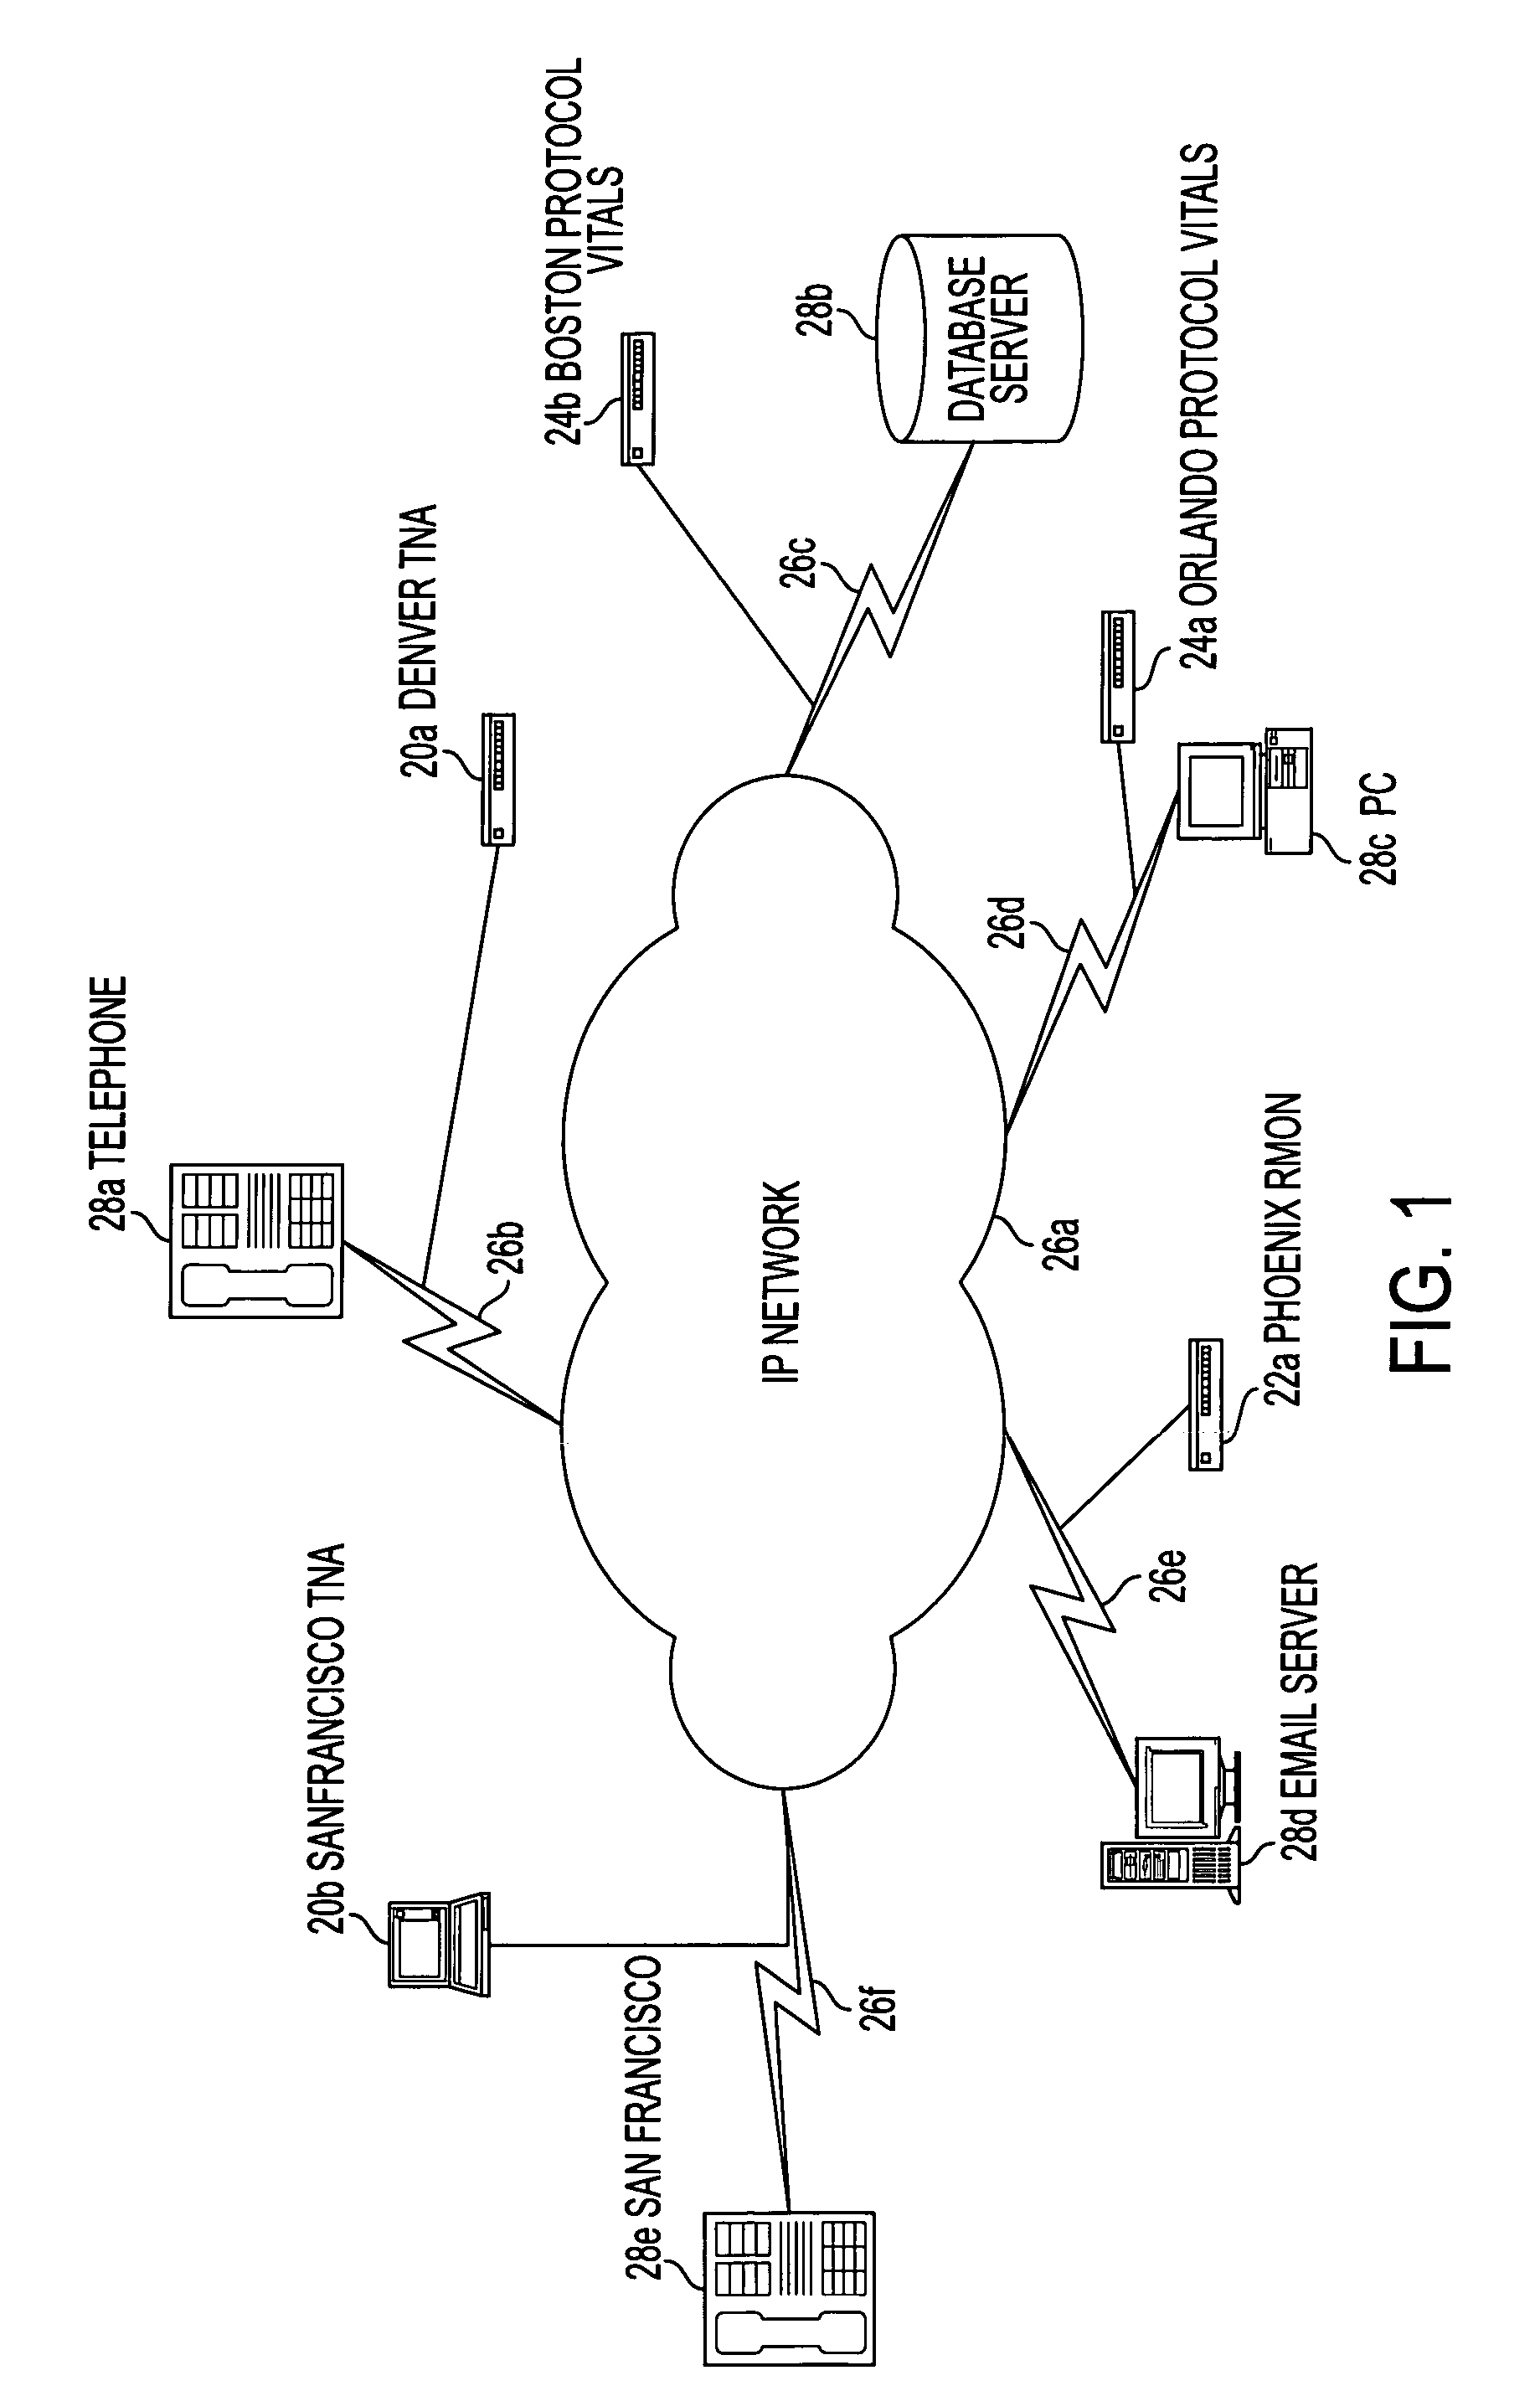 Graphical user interface for adding measurements to existing distributed network troubleshooting system